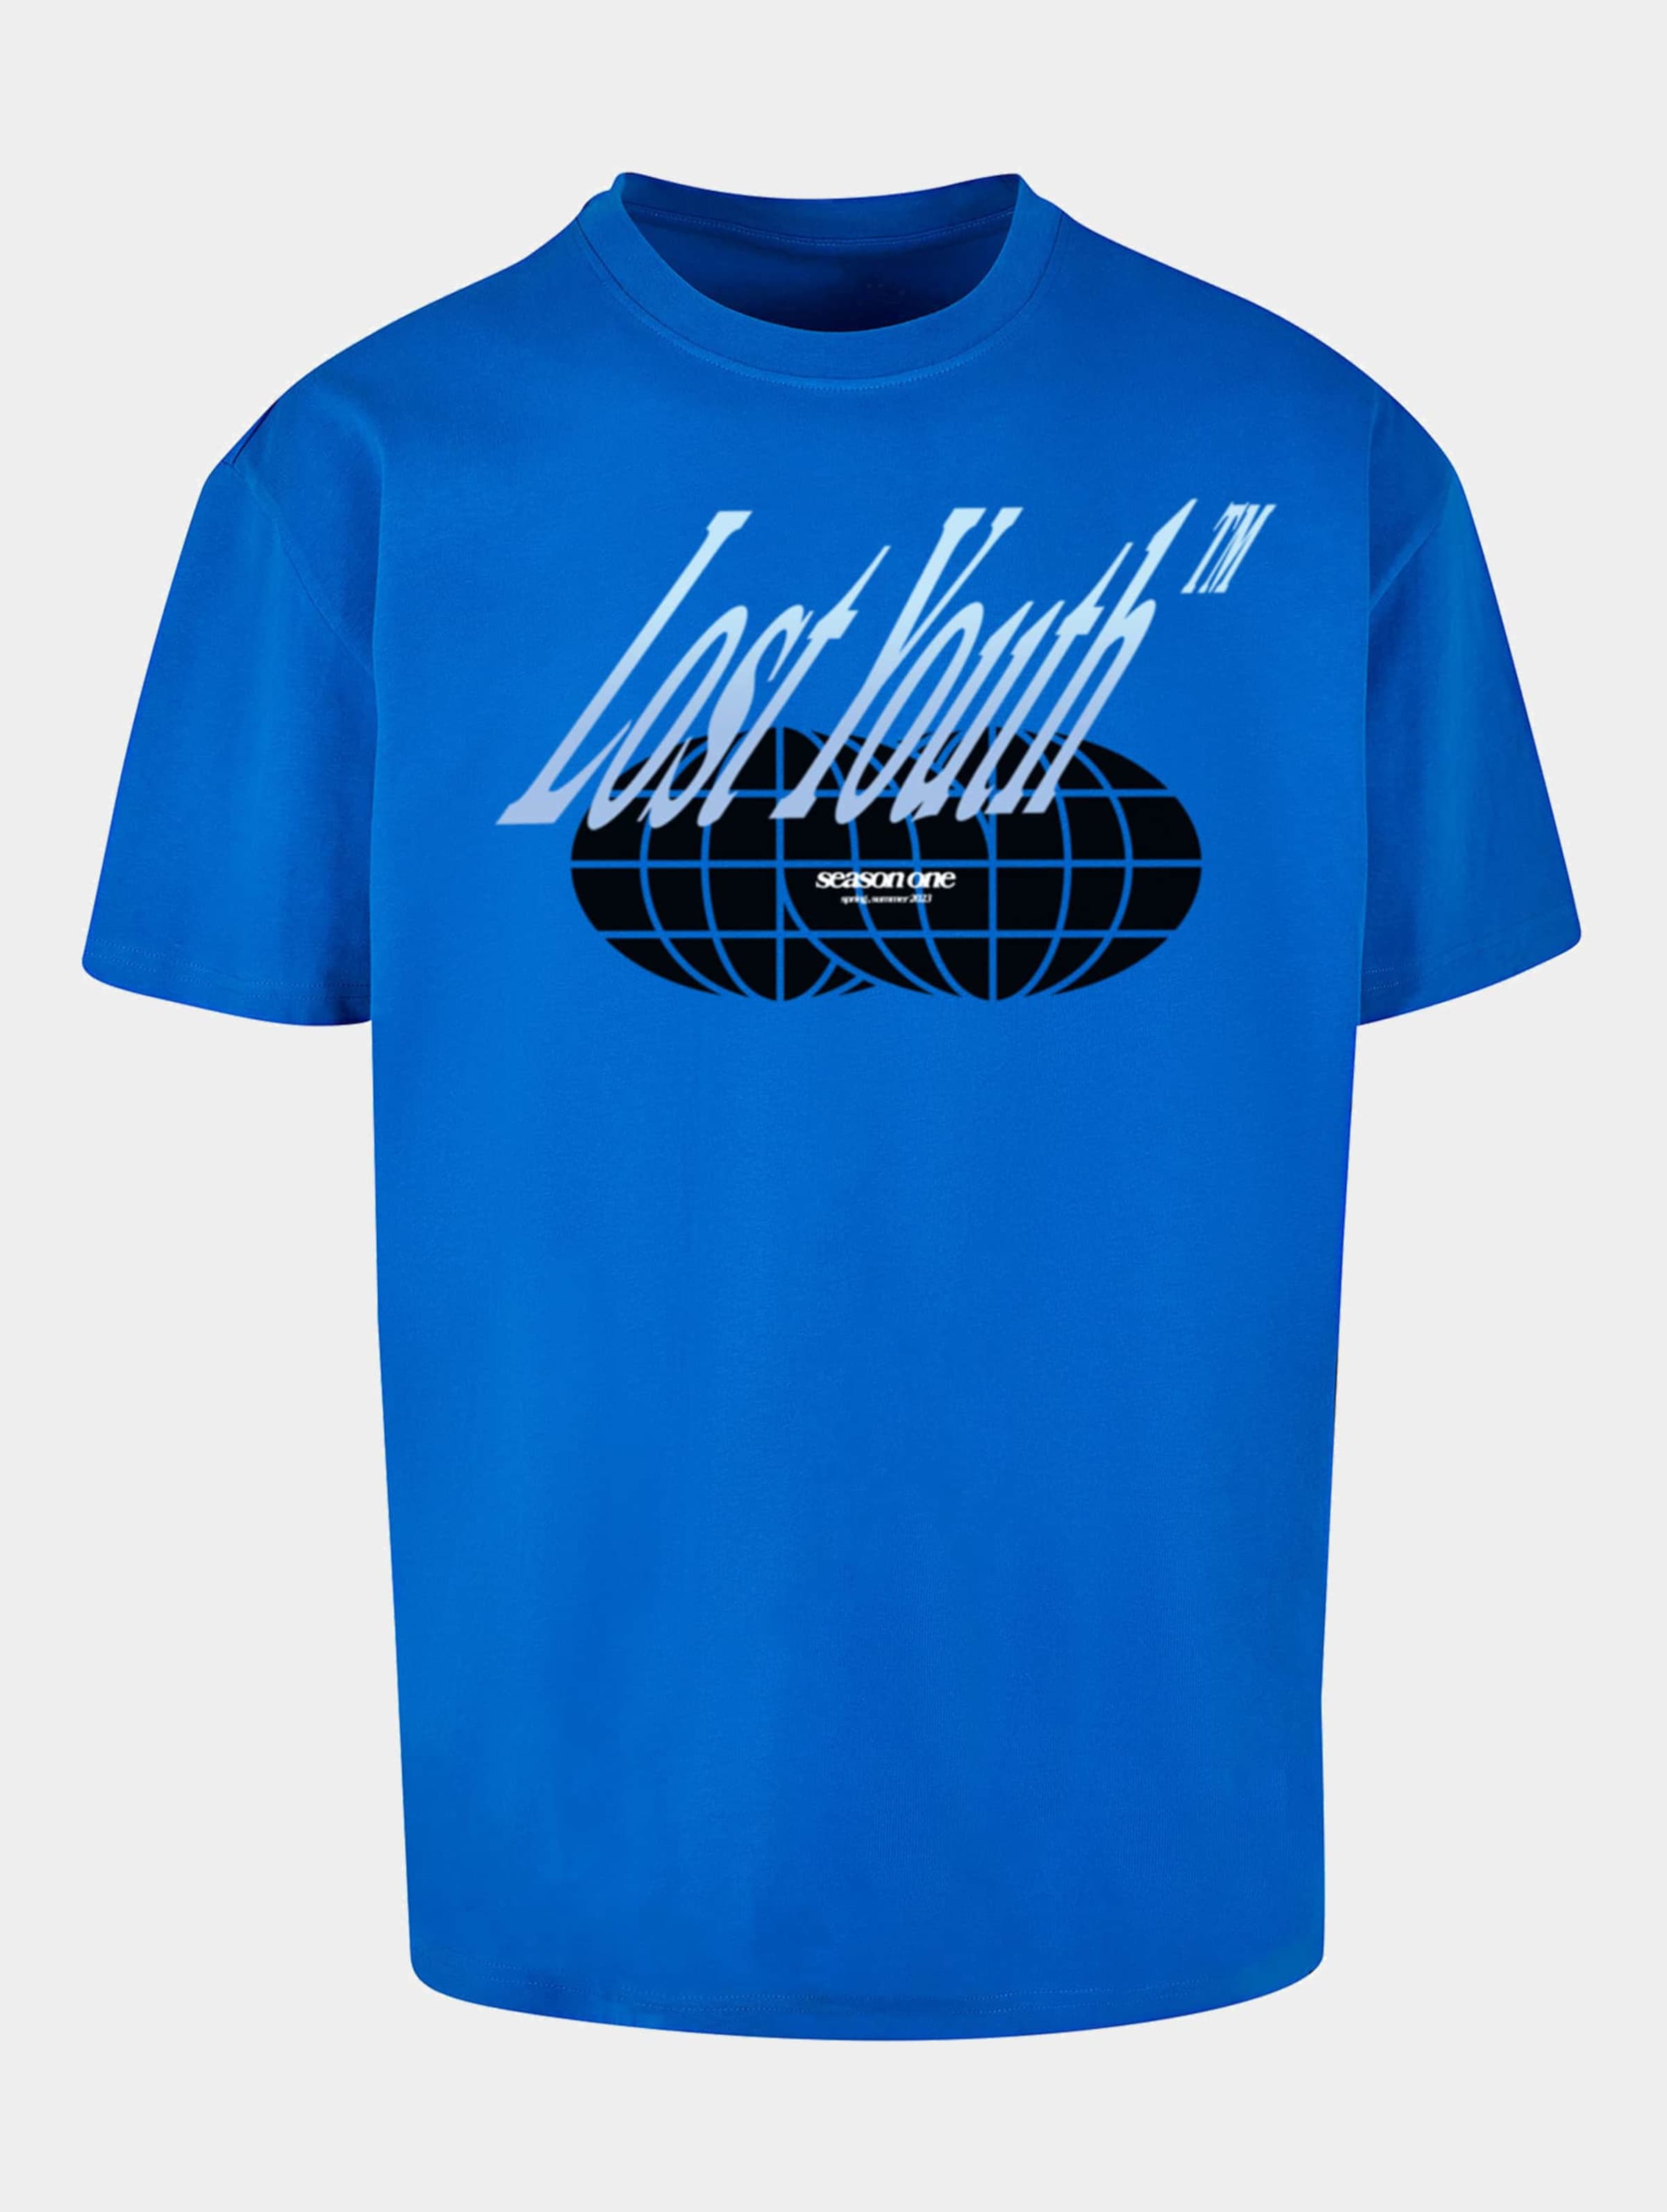 Lost Youth LY TEE - ICON V.5 Mannen op kleur blauw, Maat S